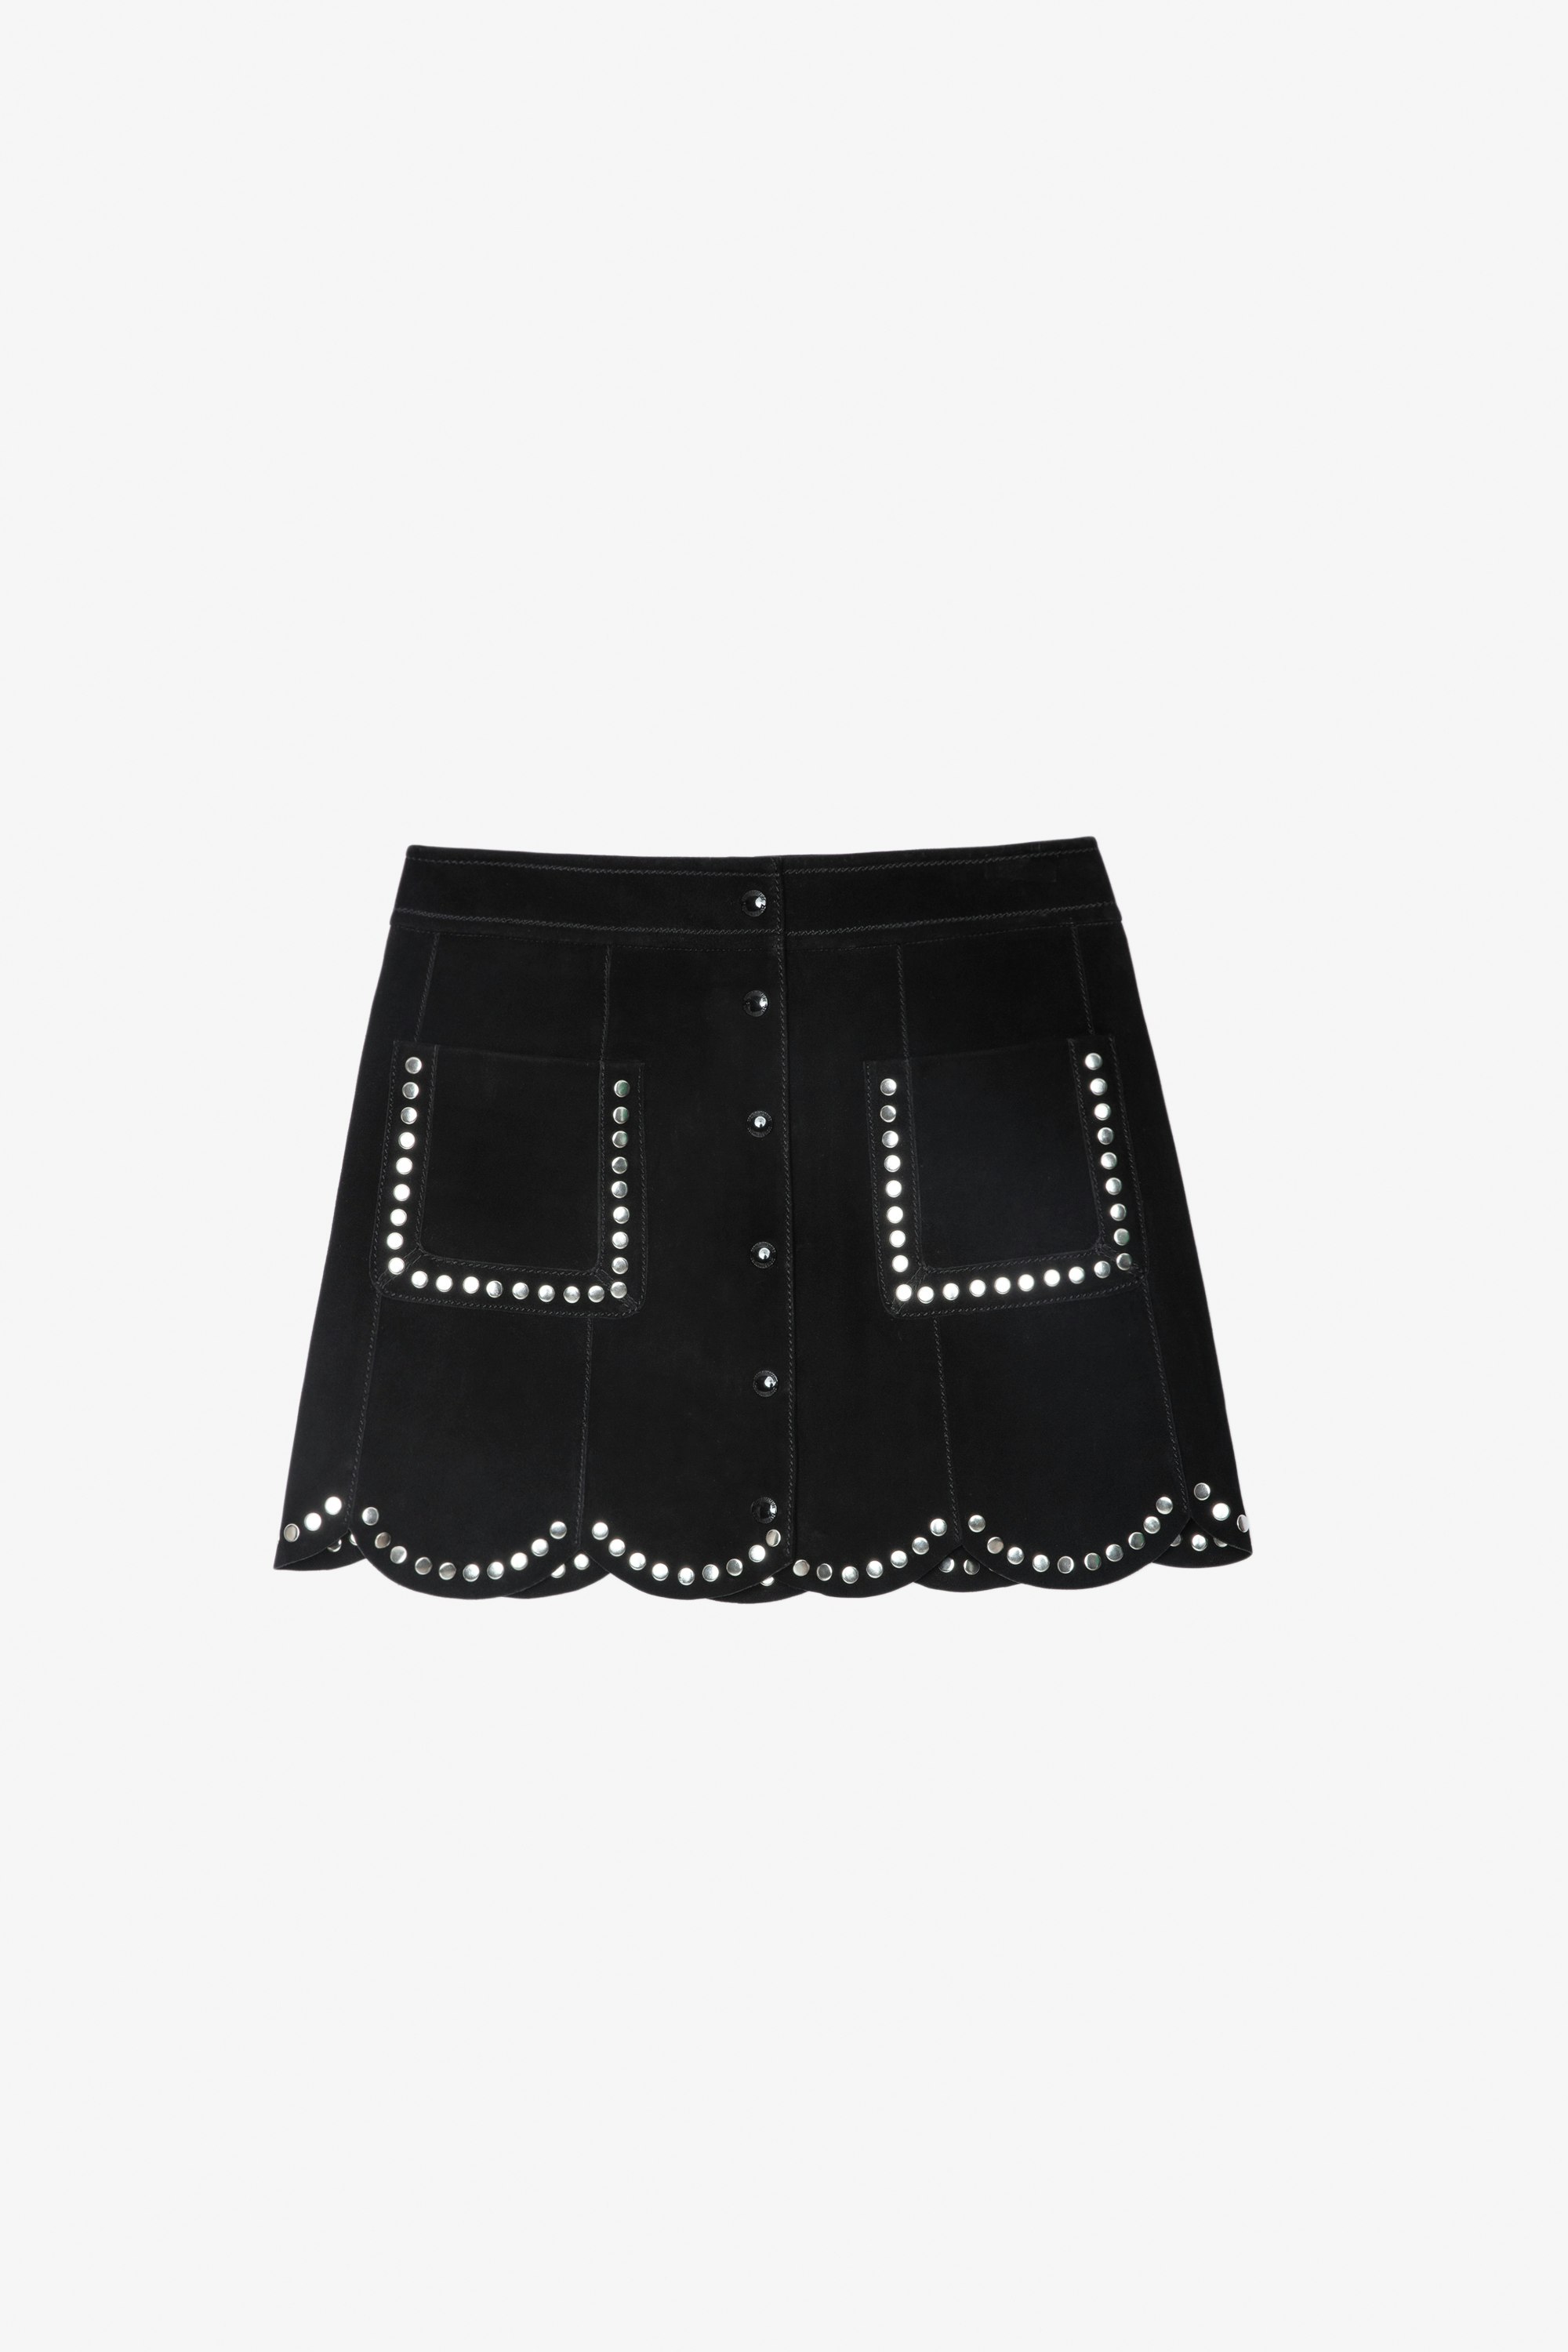 Jasia Studded Suede Skirt undefined